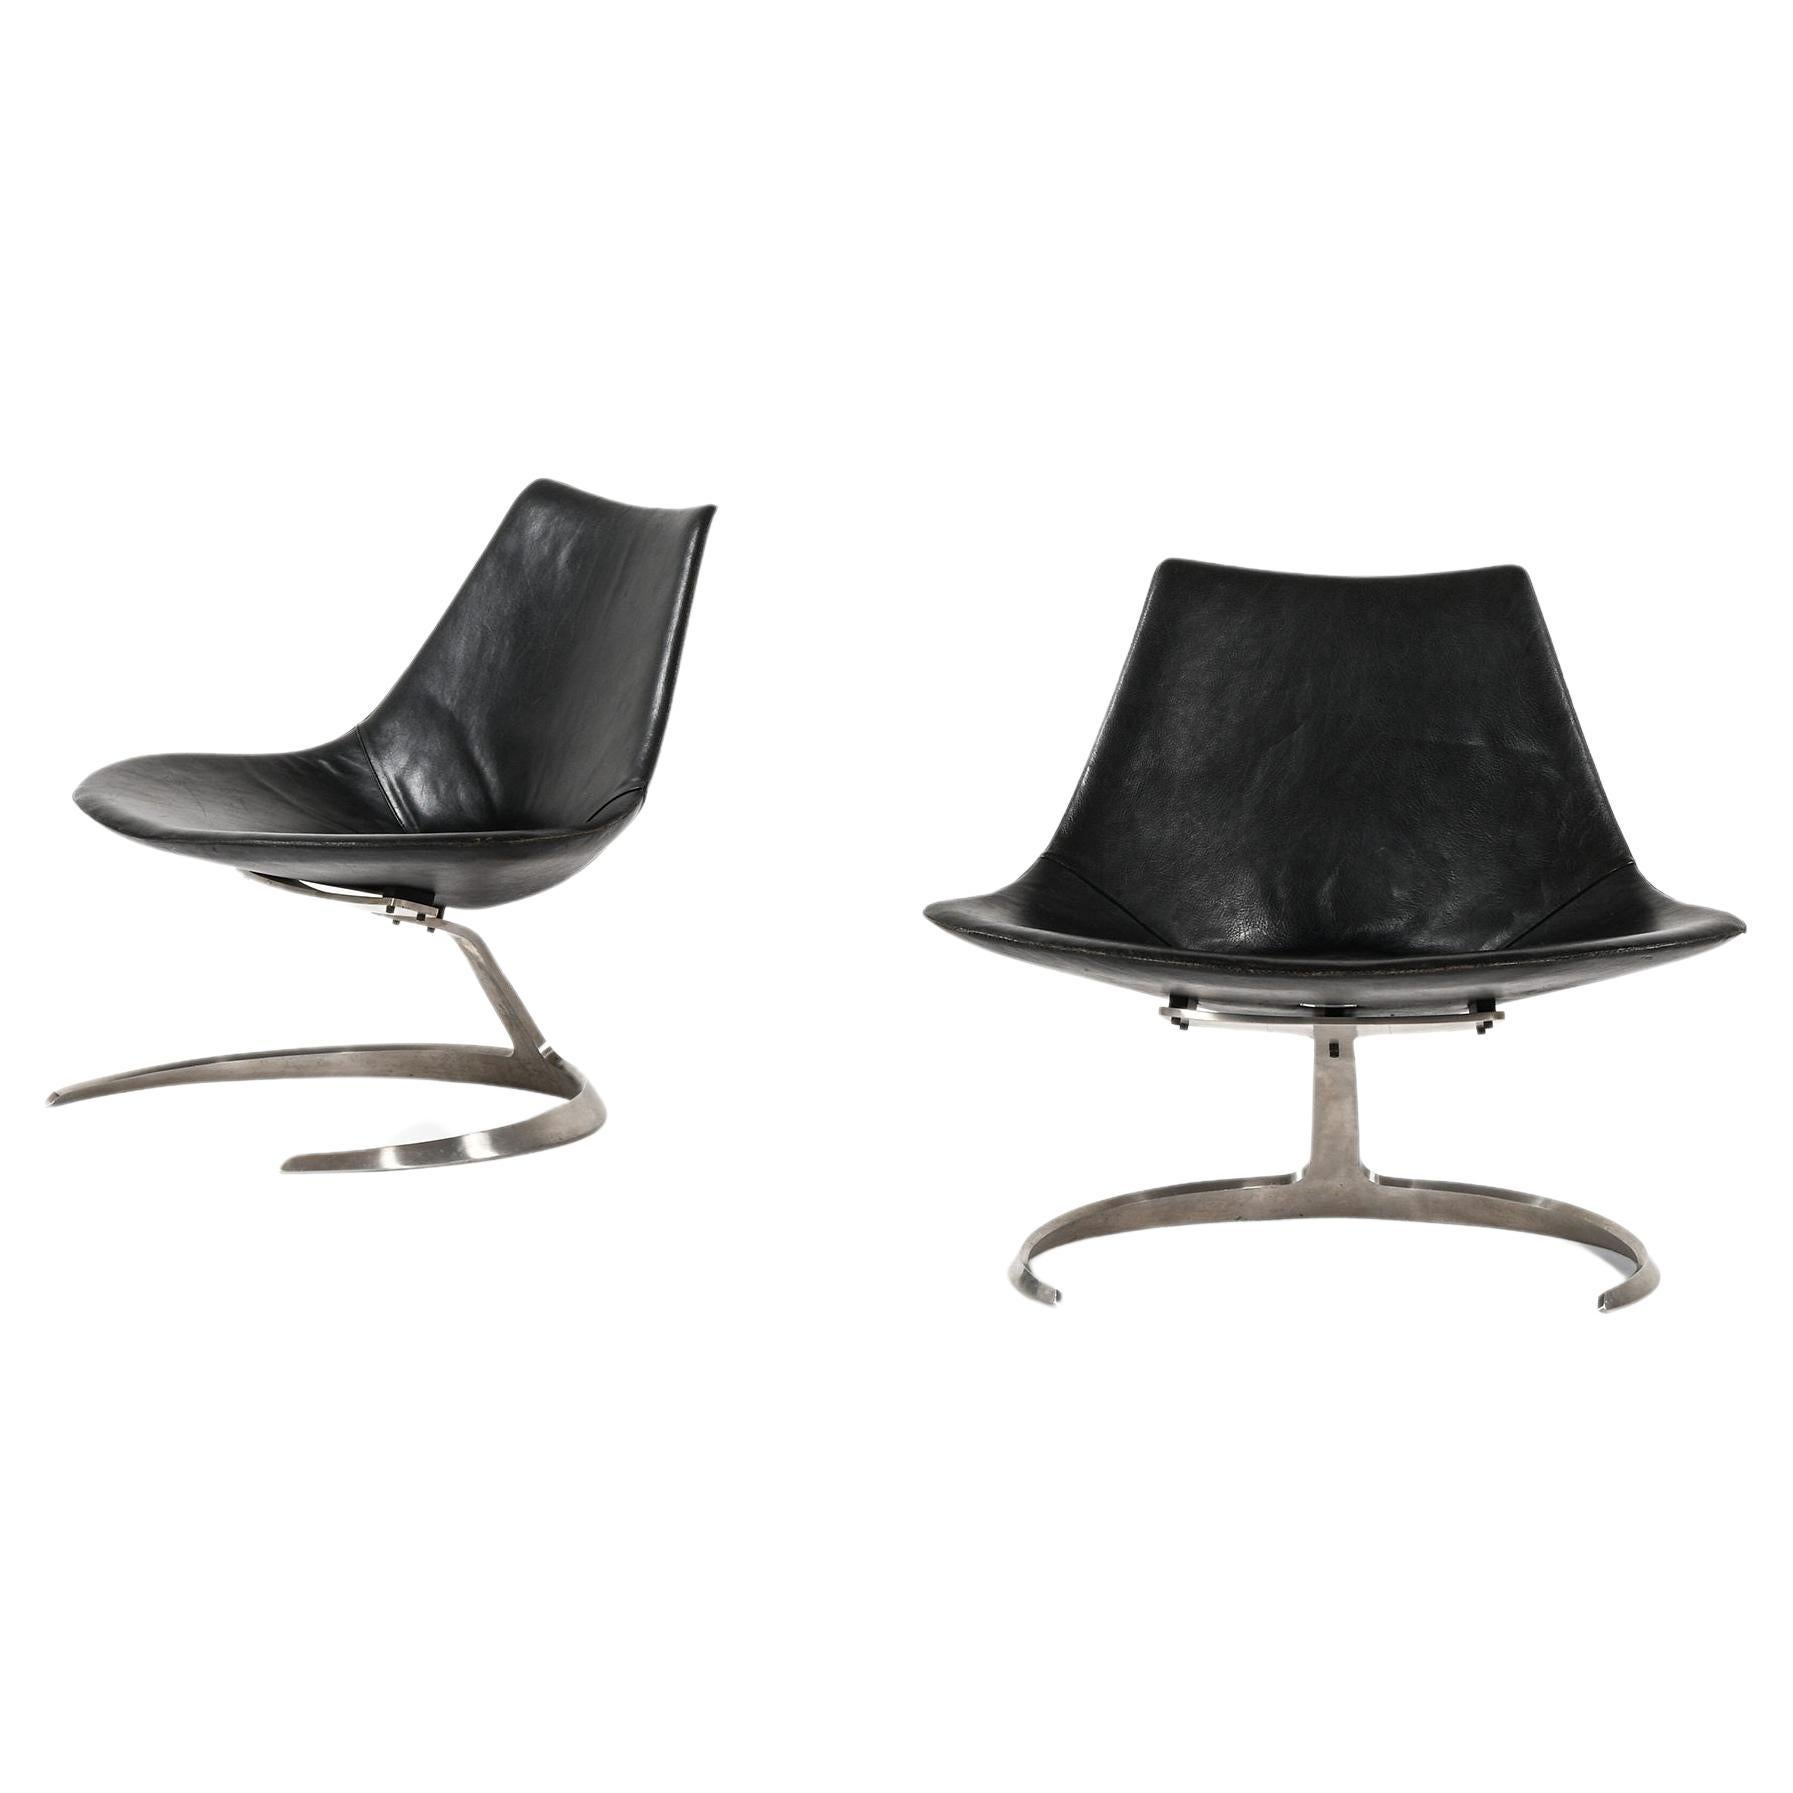 Preben Fabricius & Jørgen Kastholm Scimitar easy chairs Steel and Leather, 1960s For Sale